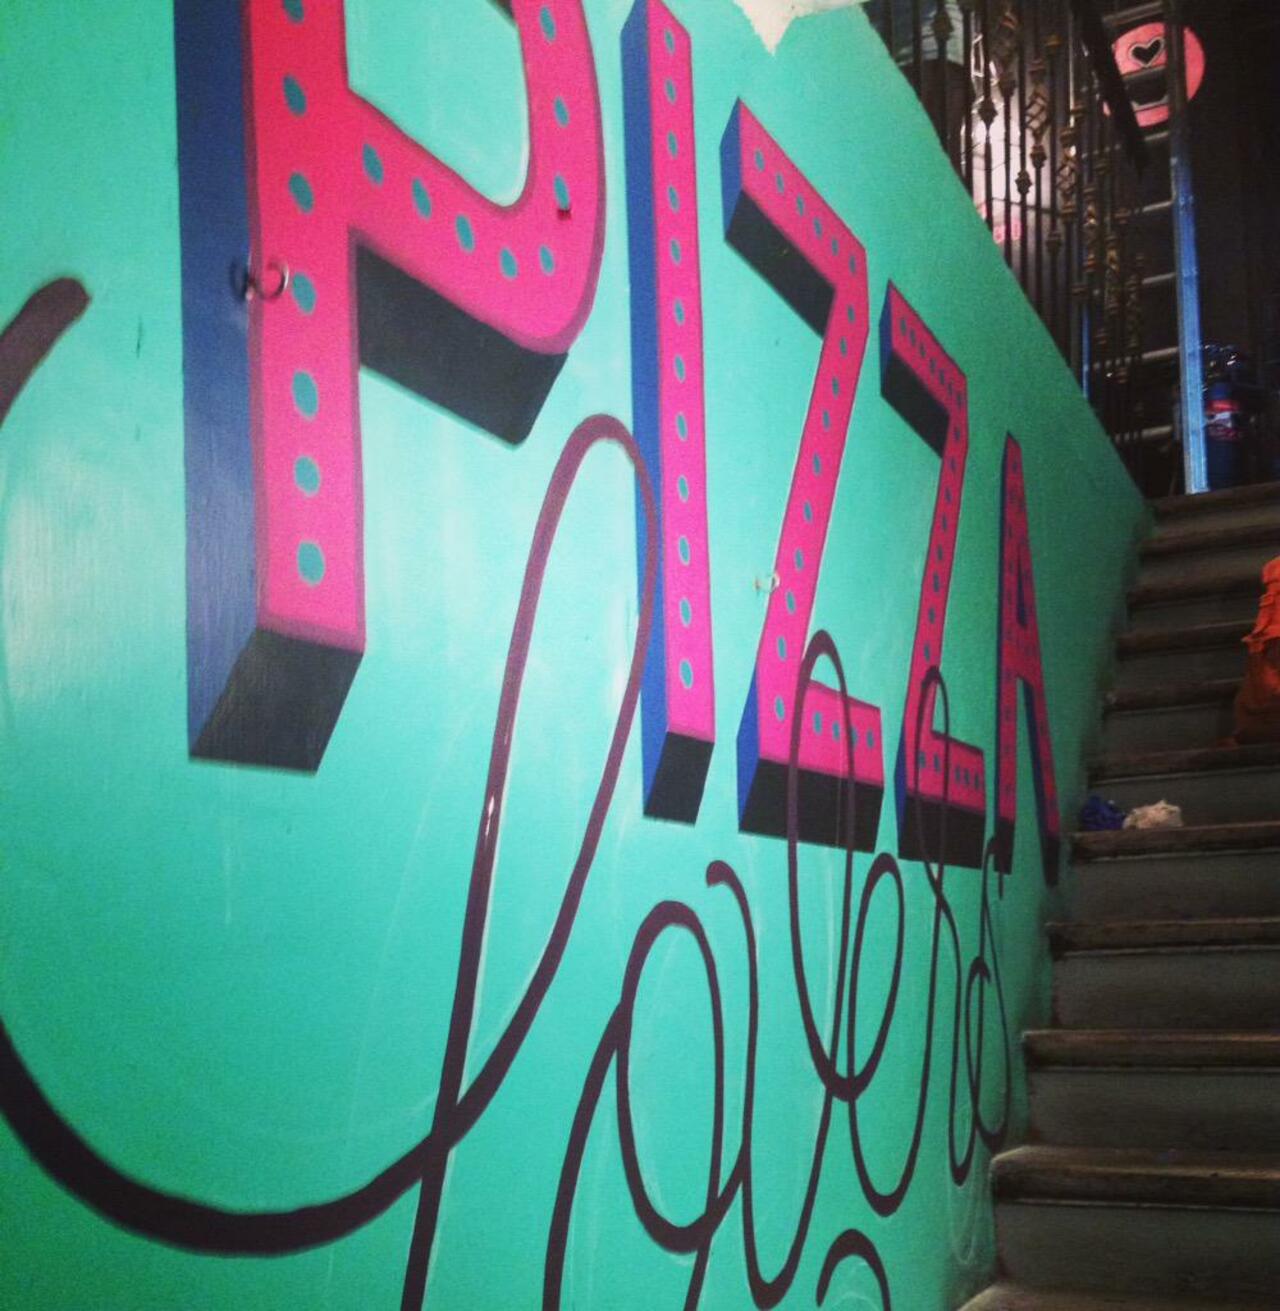 New painting wall #painting #wall #graffiti #mural #lettering #letters #goodtype http://t.co/wCrsqzmJtF